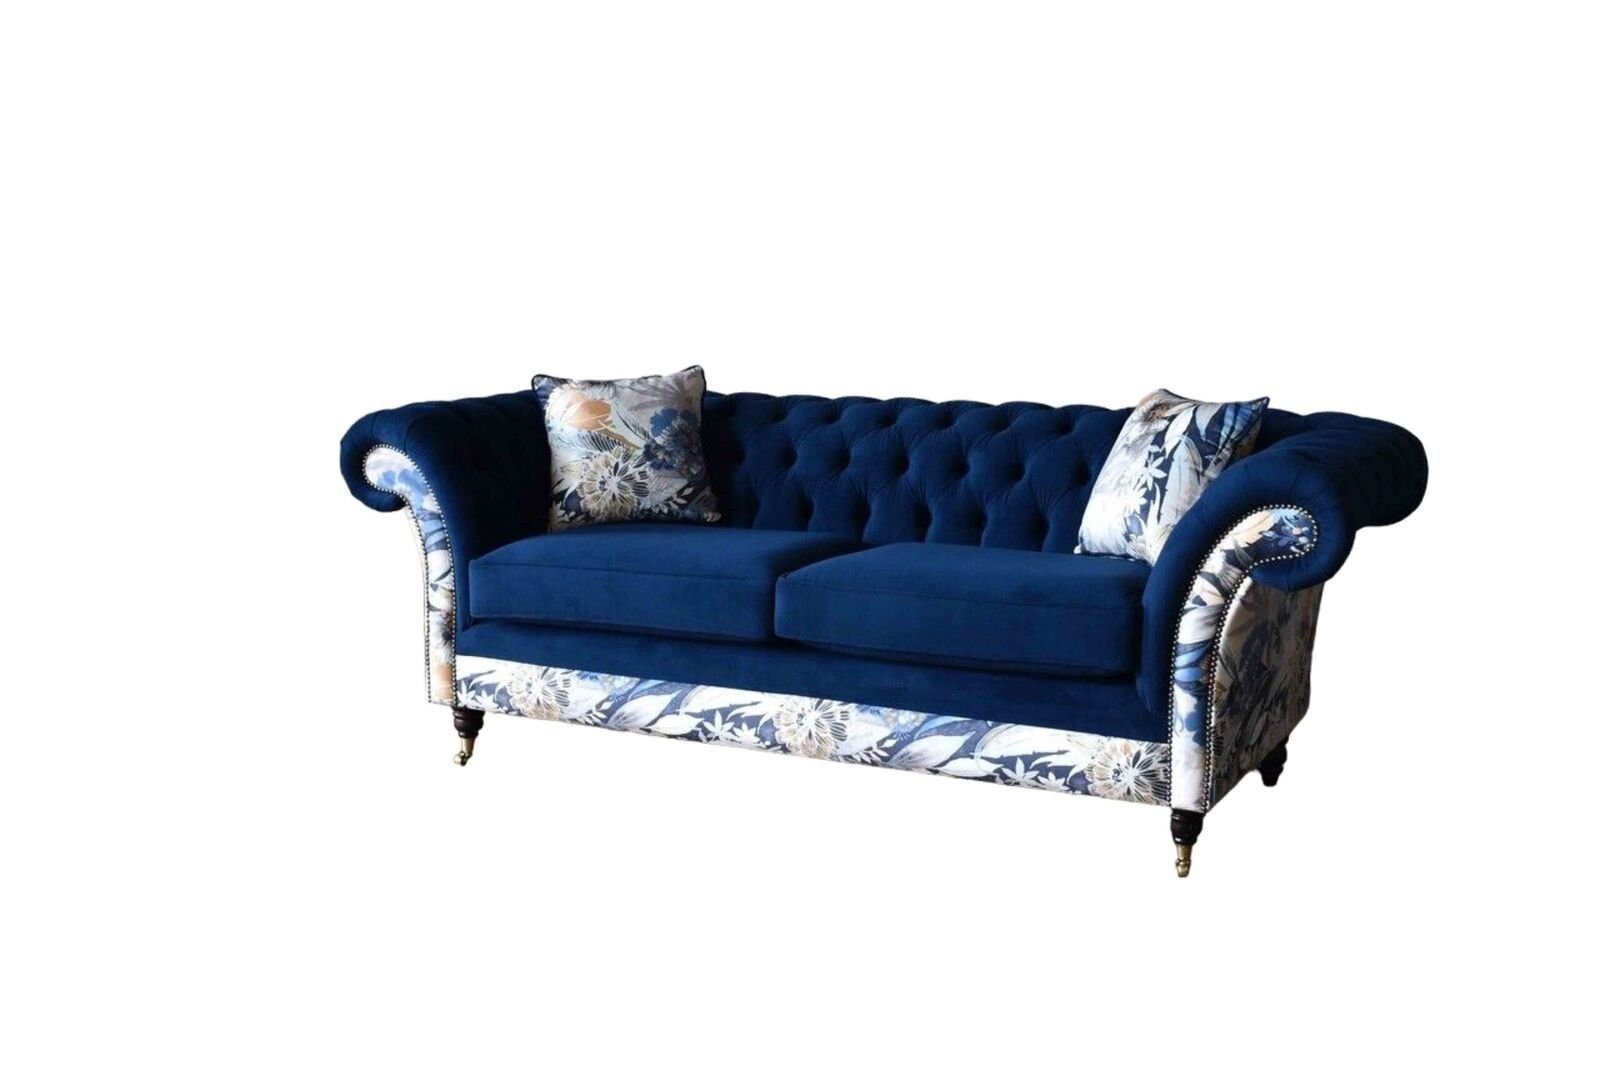 Europe Sitz JVmoebel Polster in Blauer Lounge Sofa Samt Royal Sofas, Chesterfield Made Couch